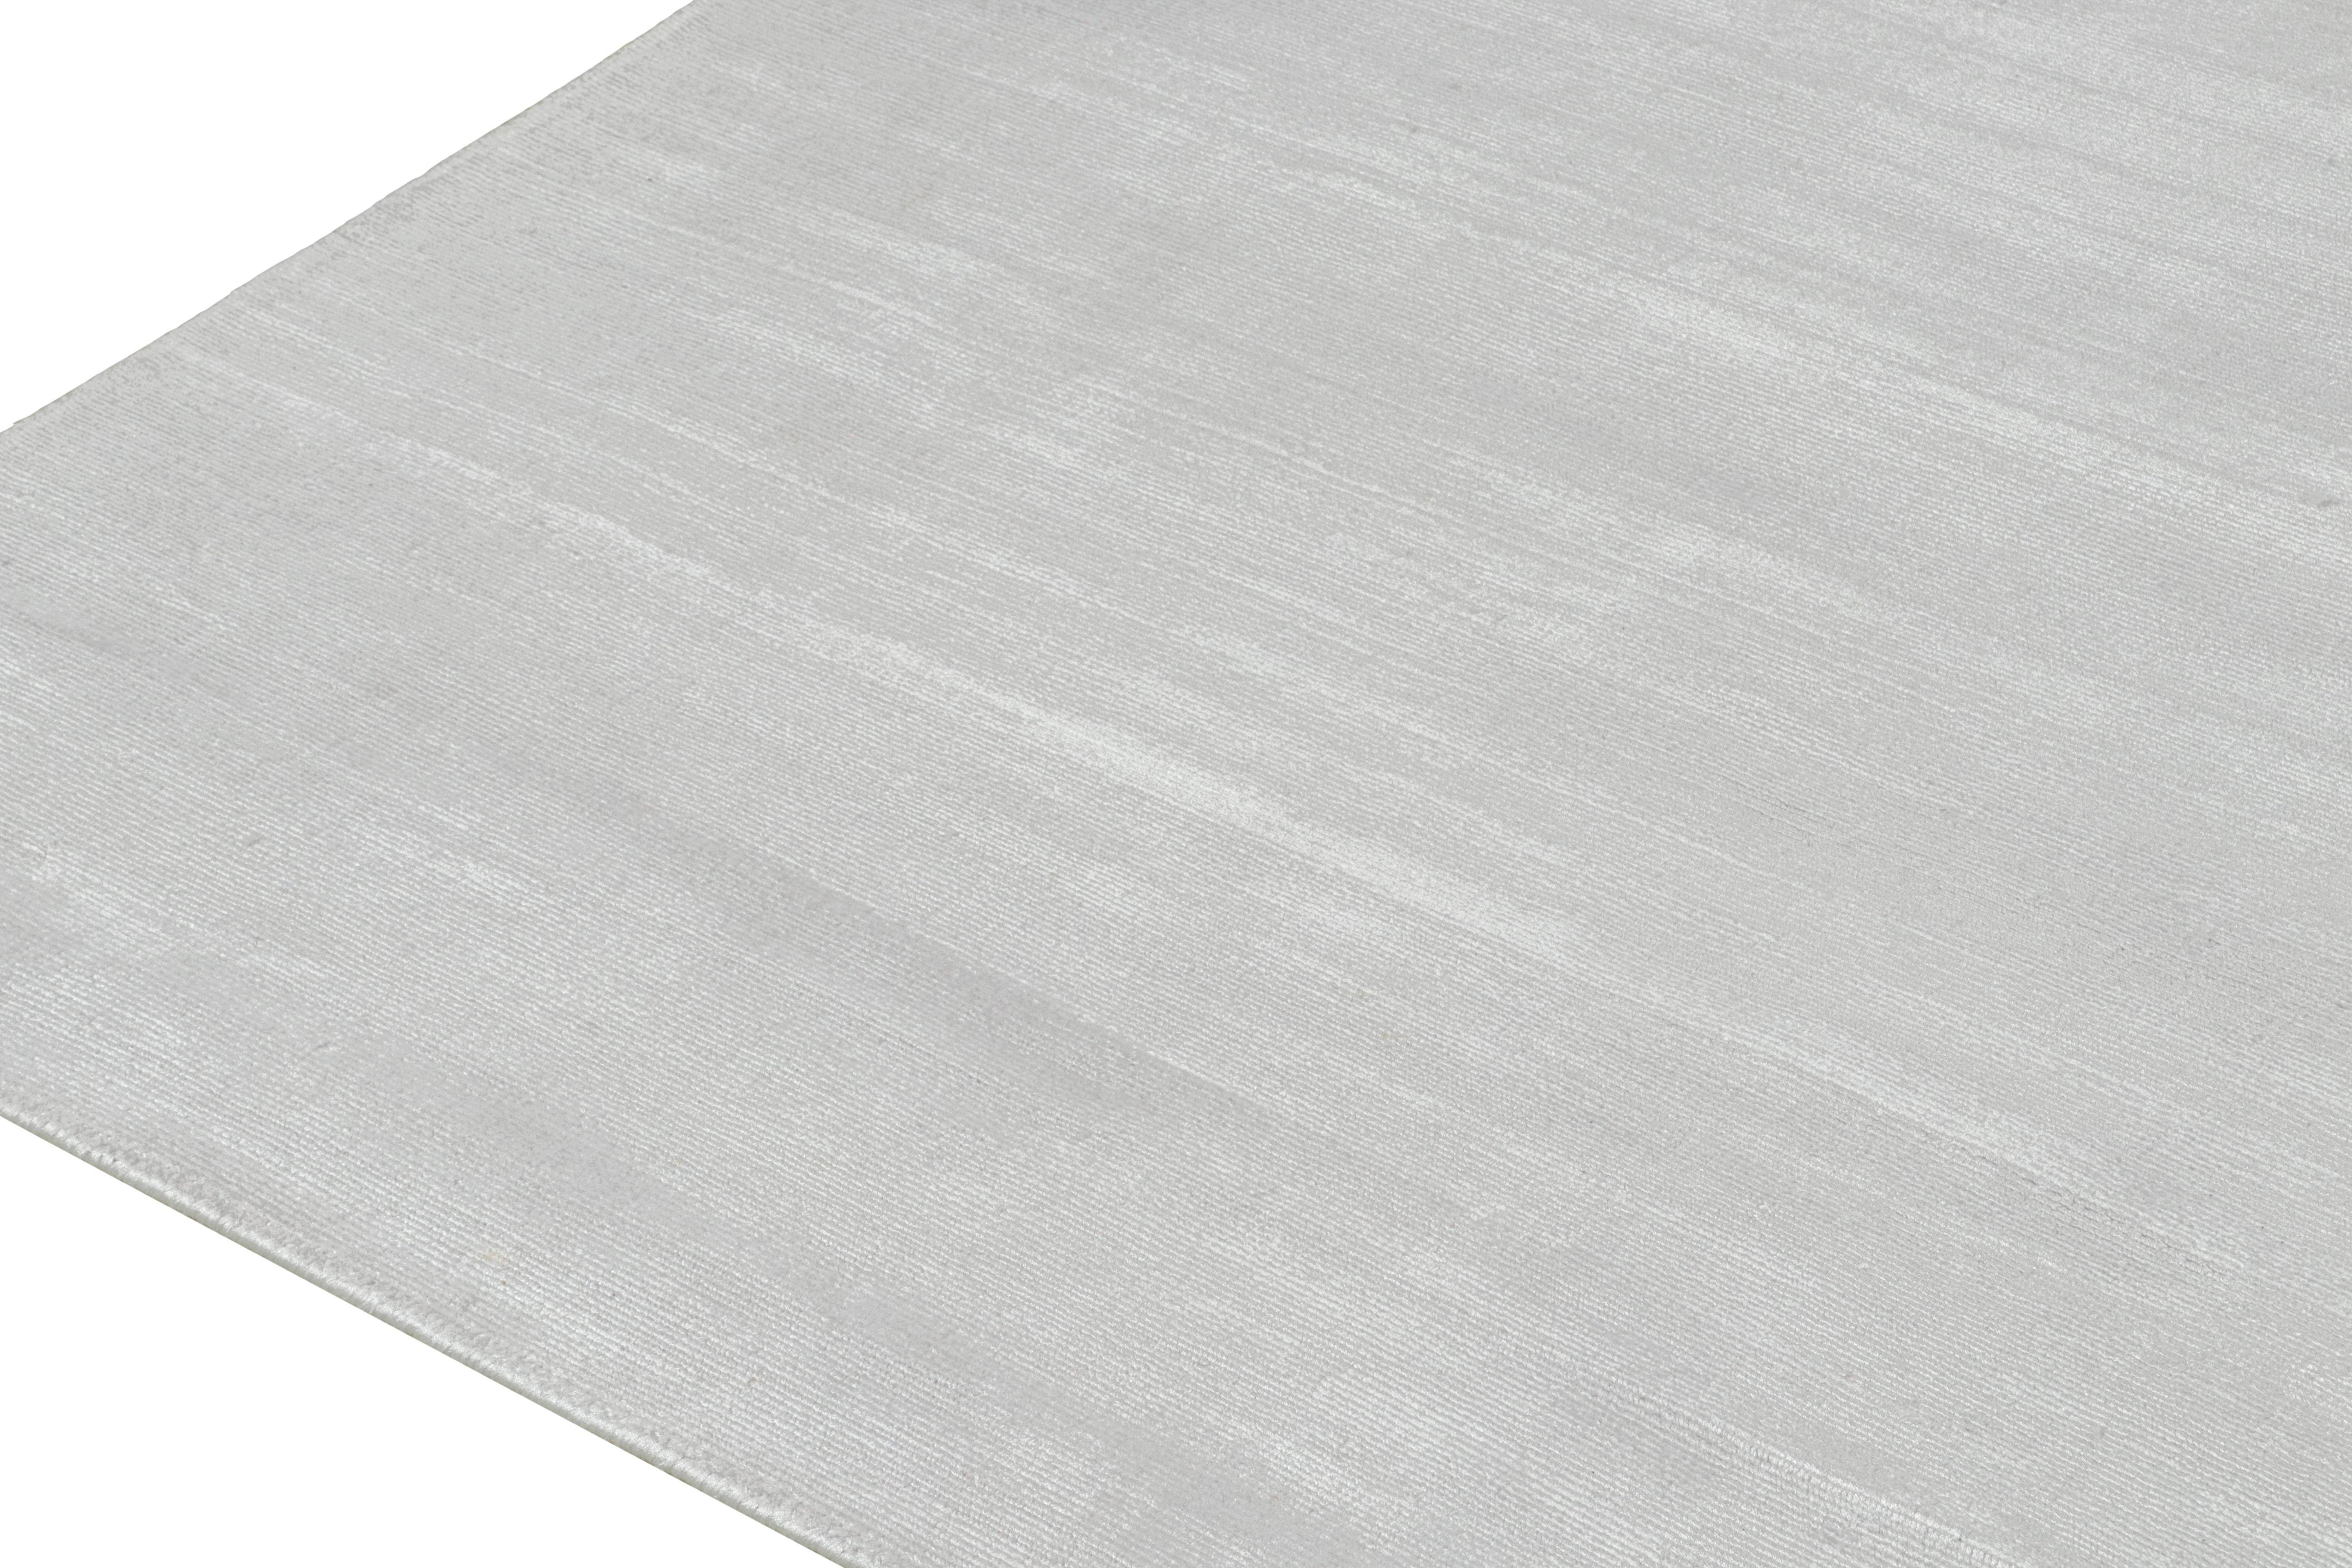 Rug & Kilim’s Modern Rug in Solid Grey and Off-White Striae For Sale